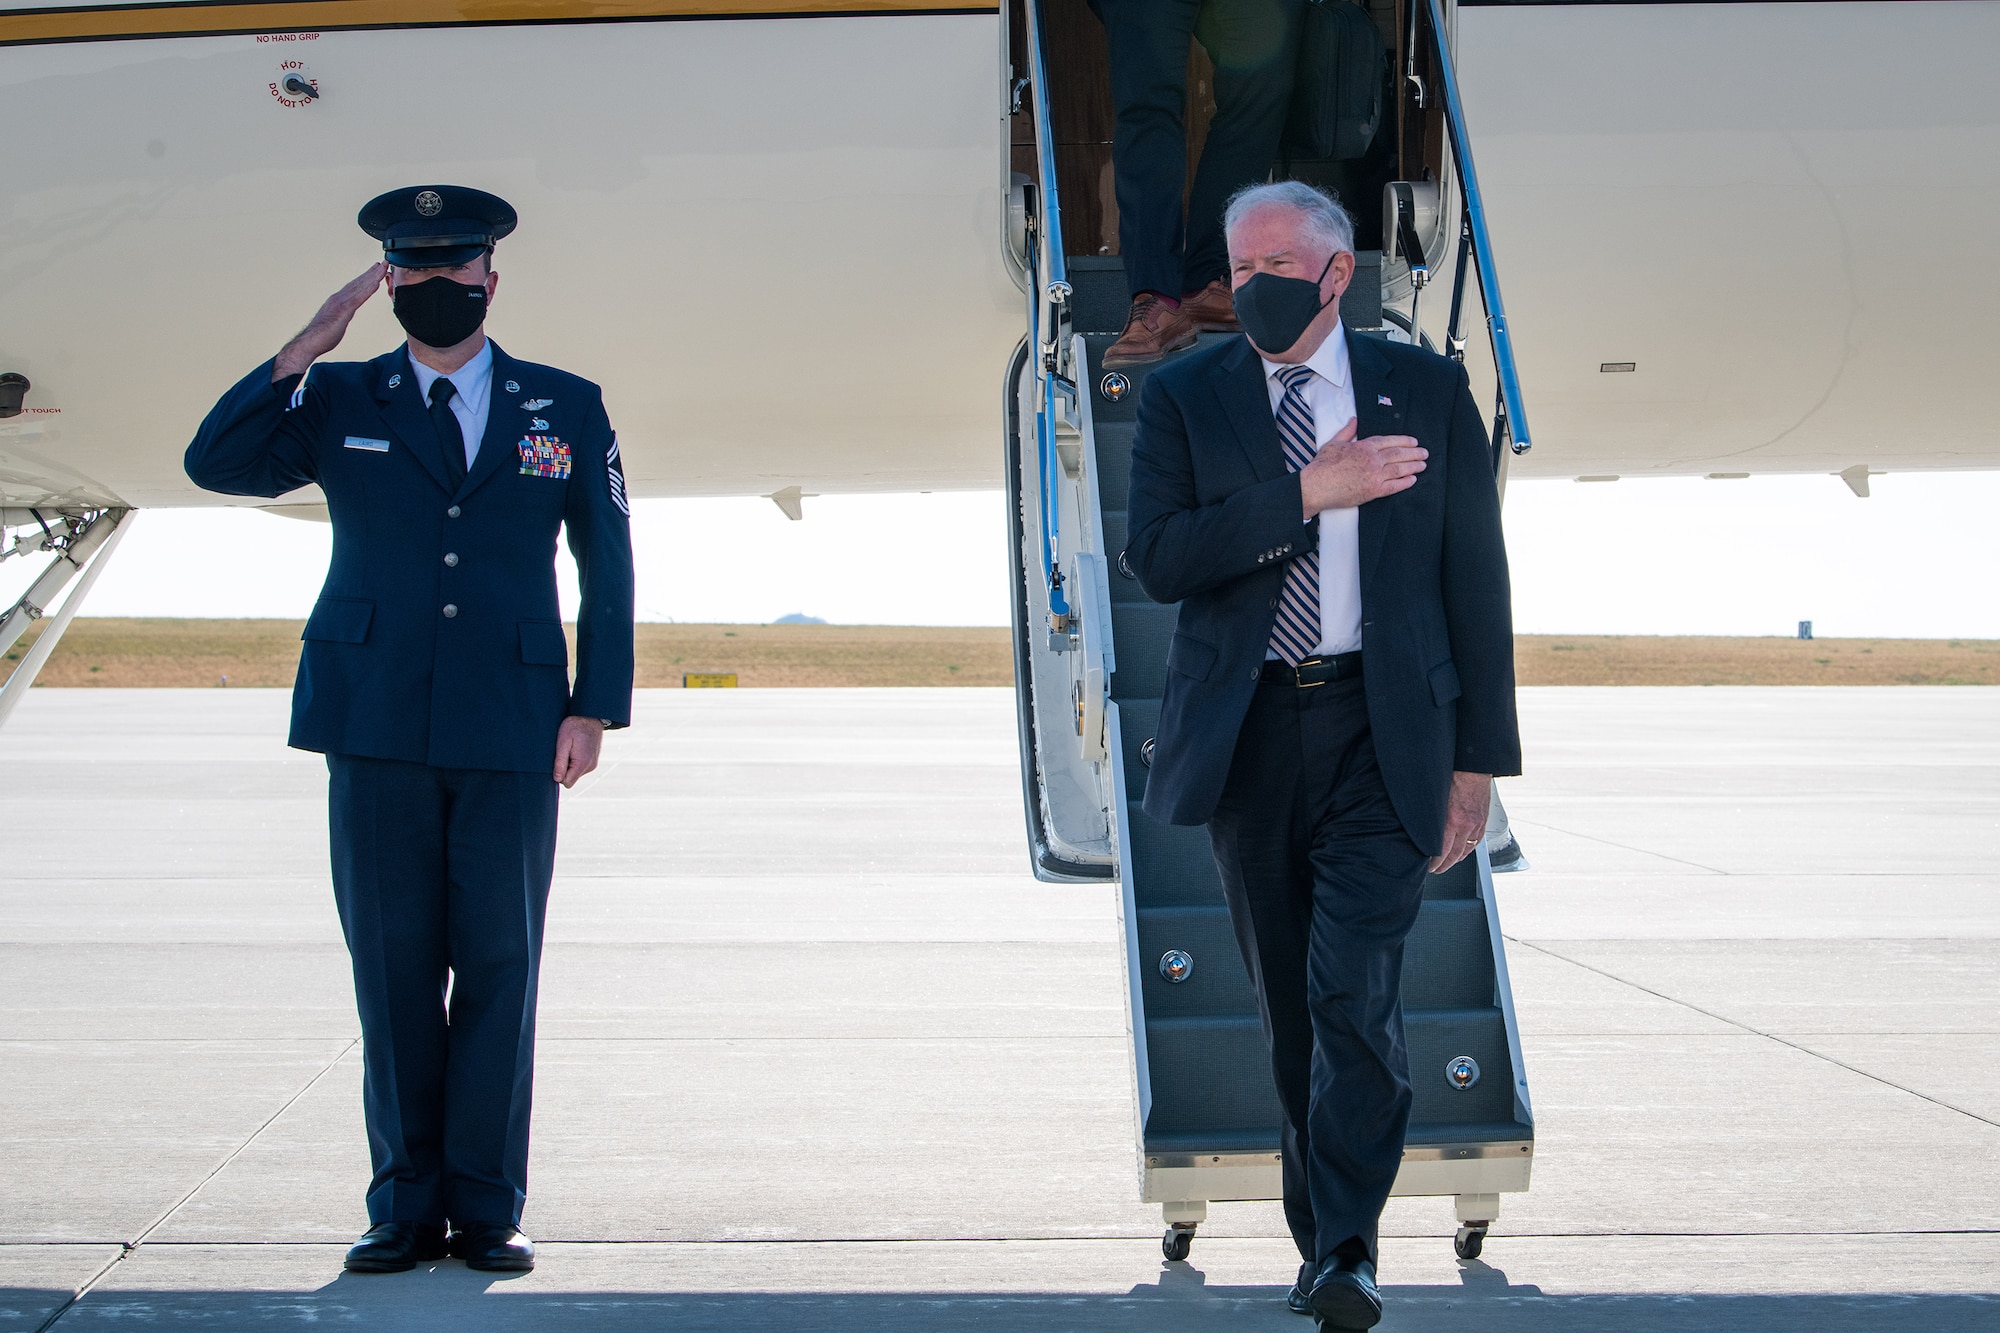 Secretary of the Air Force Frank Kendall disembarks an aircraft and arrives at Buckley Space Force Base, Colo., Aug. 23, 2021.